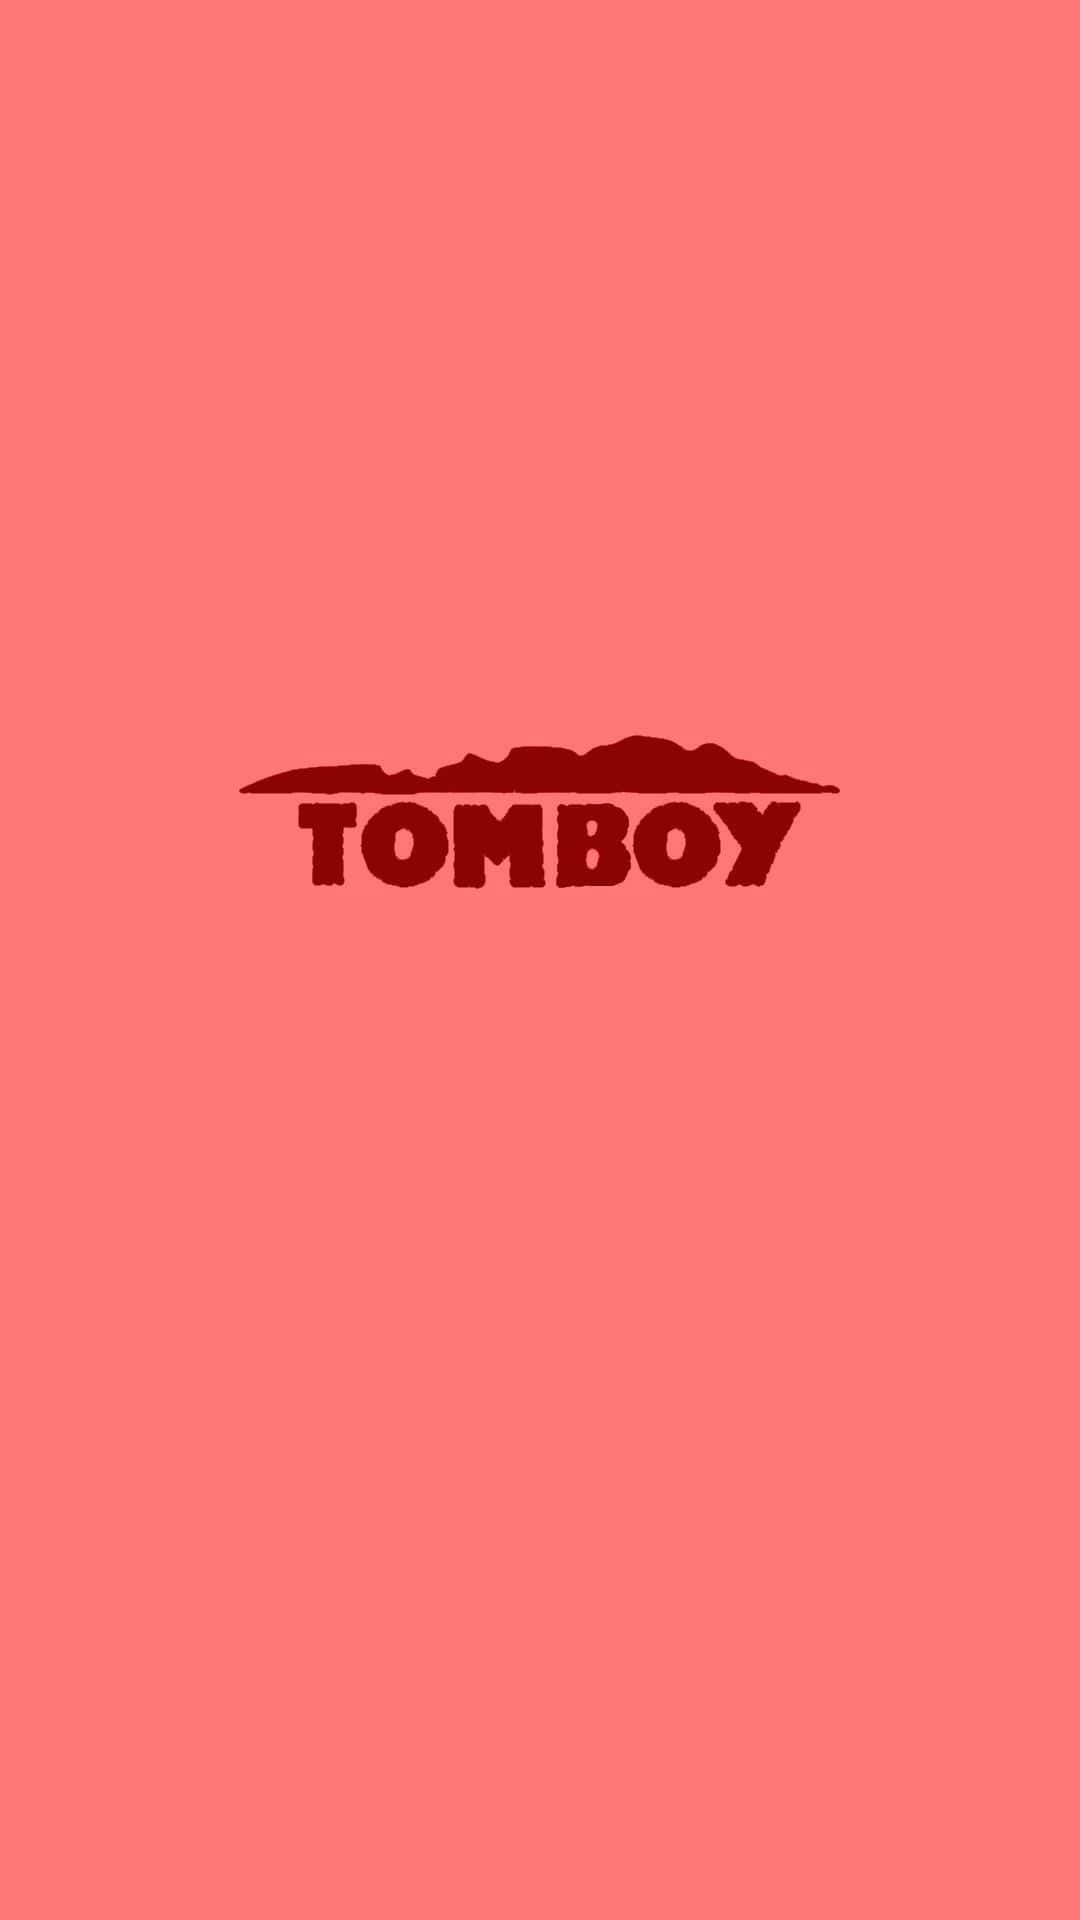 tomboy 1080P 2k 4k Full HD Wallpapers Backgrounds Free Download   Wallpaper Crafter